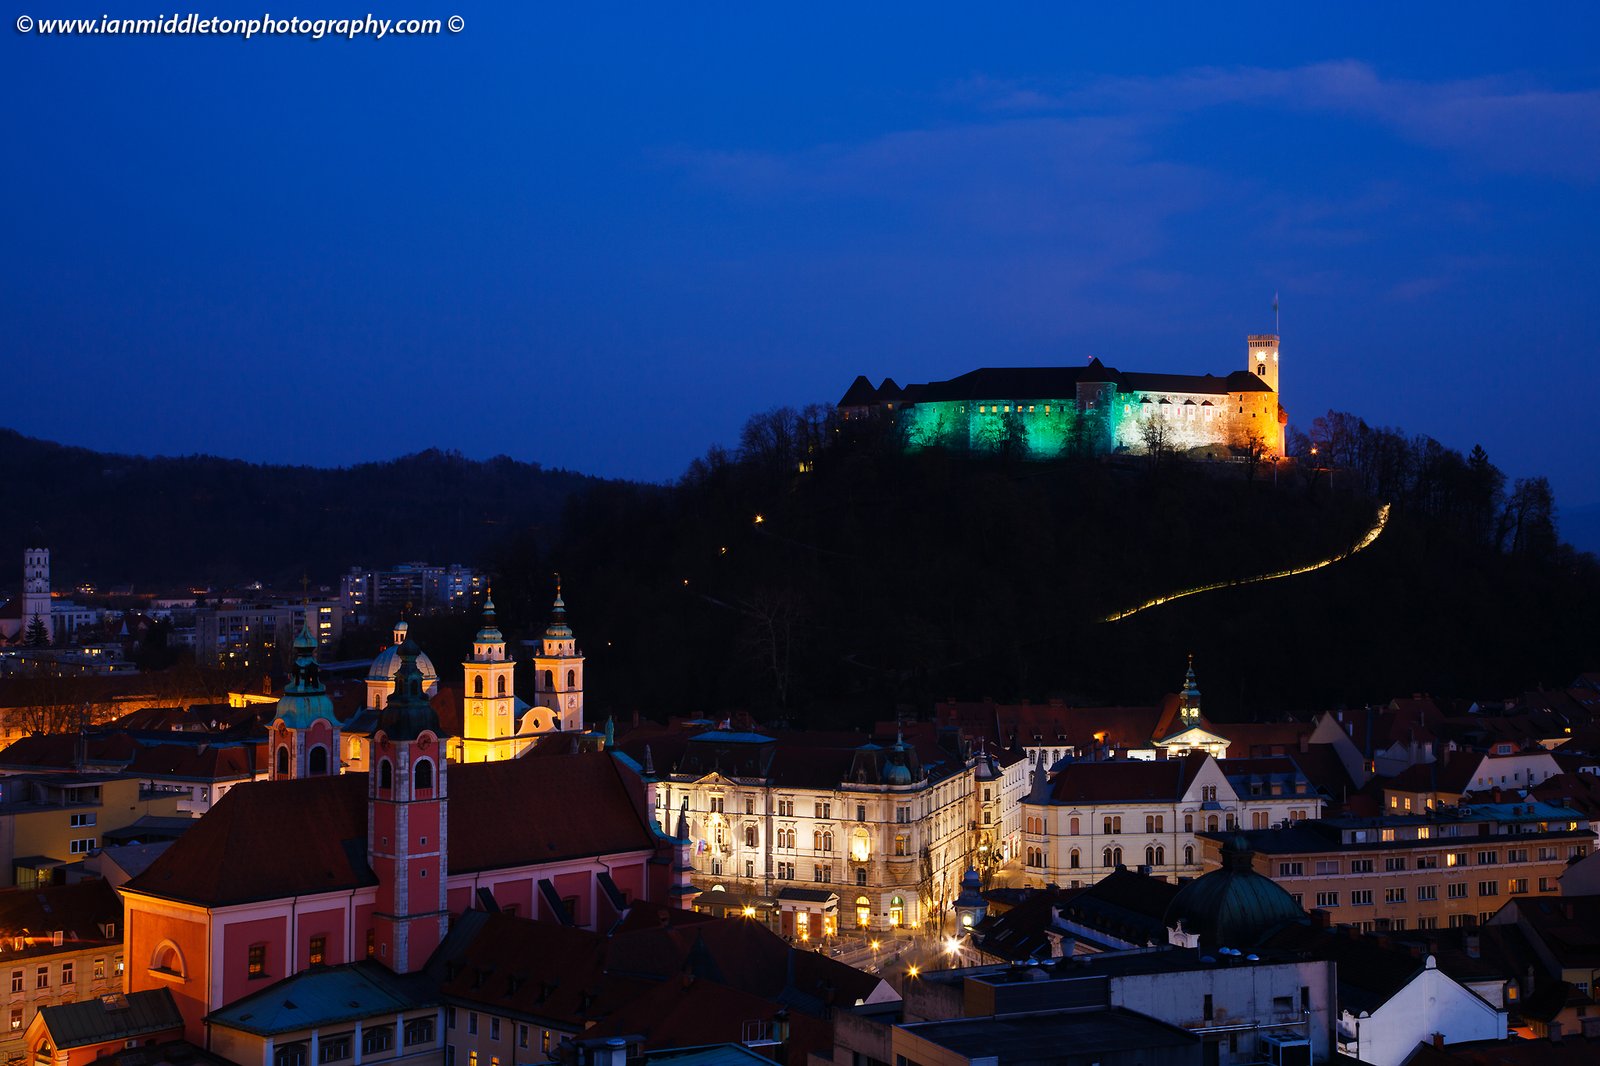 View down to the centre of Ljubljana and the Ljubljana Castle lit up in the colours of the Irish flag to celebrate Saint Patrick's Day weekend 2016 in Slovenia. The castle was lit up green last year to celebrate the event, but as Ljubljana is the European Green Capital for 2016 the castle is already being lit green at night for the whole year. So the Irish embassy arranged for the colours of the flag to adorn the castle for 2016.